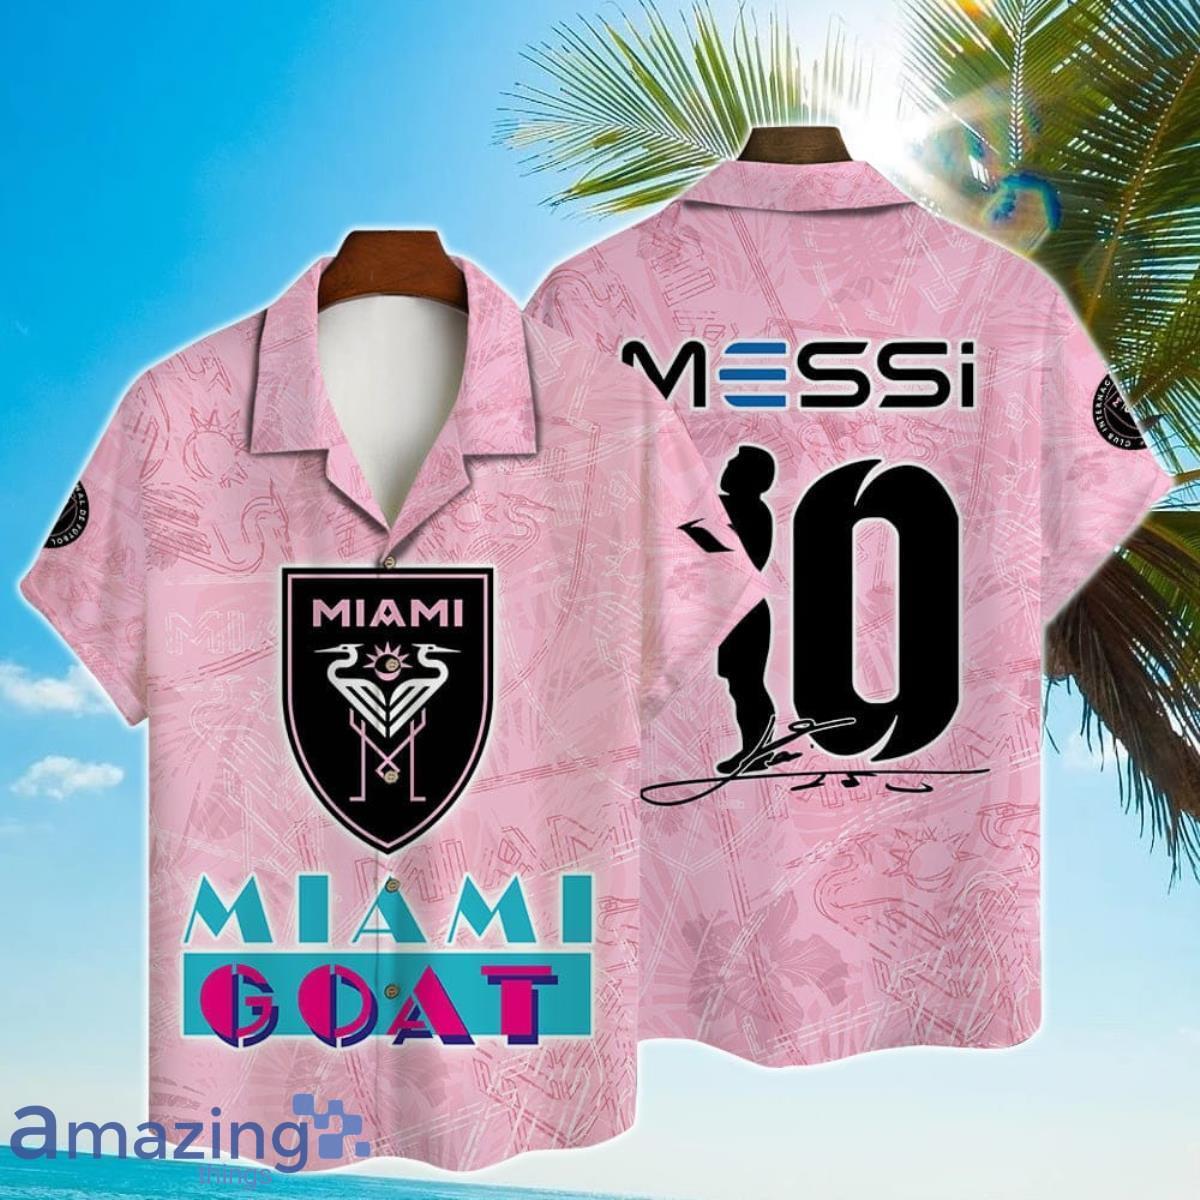 GOAT Gear: Lionel Messi Inter Miami jerseys available NOW